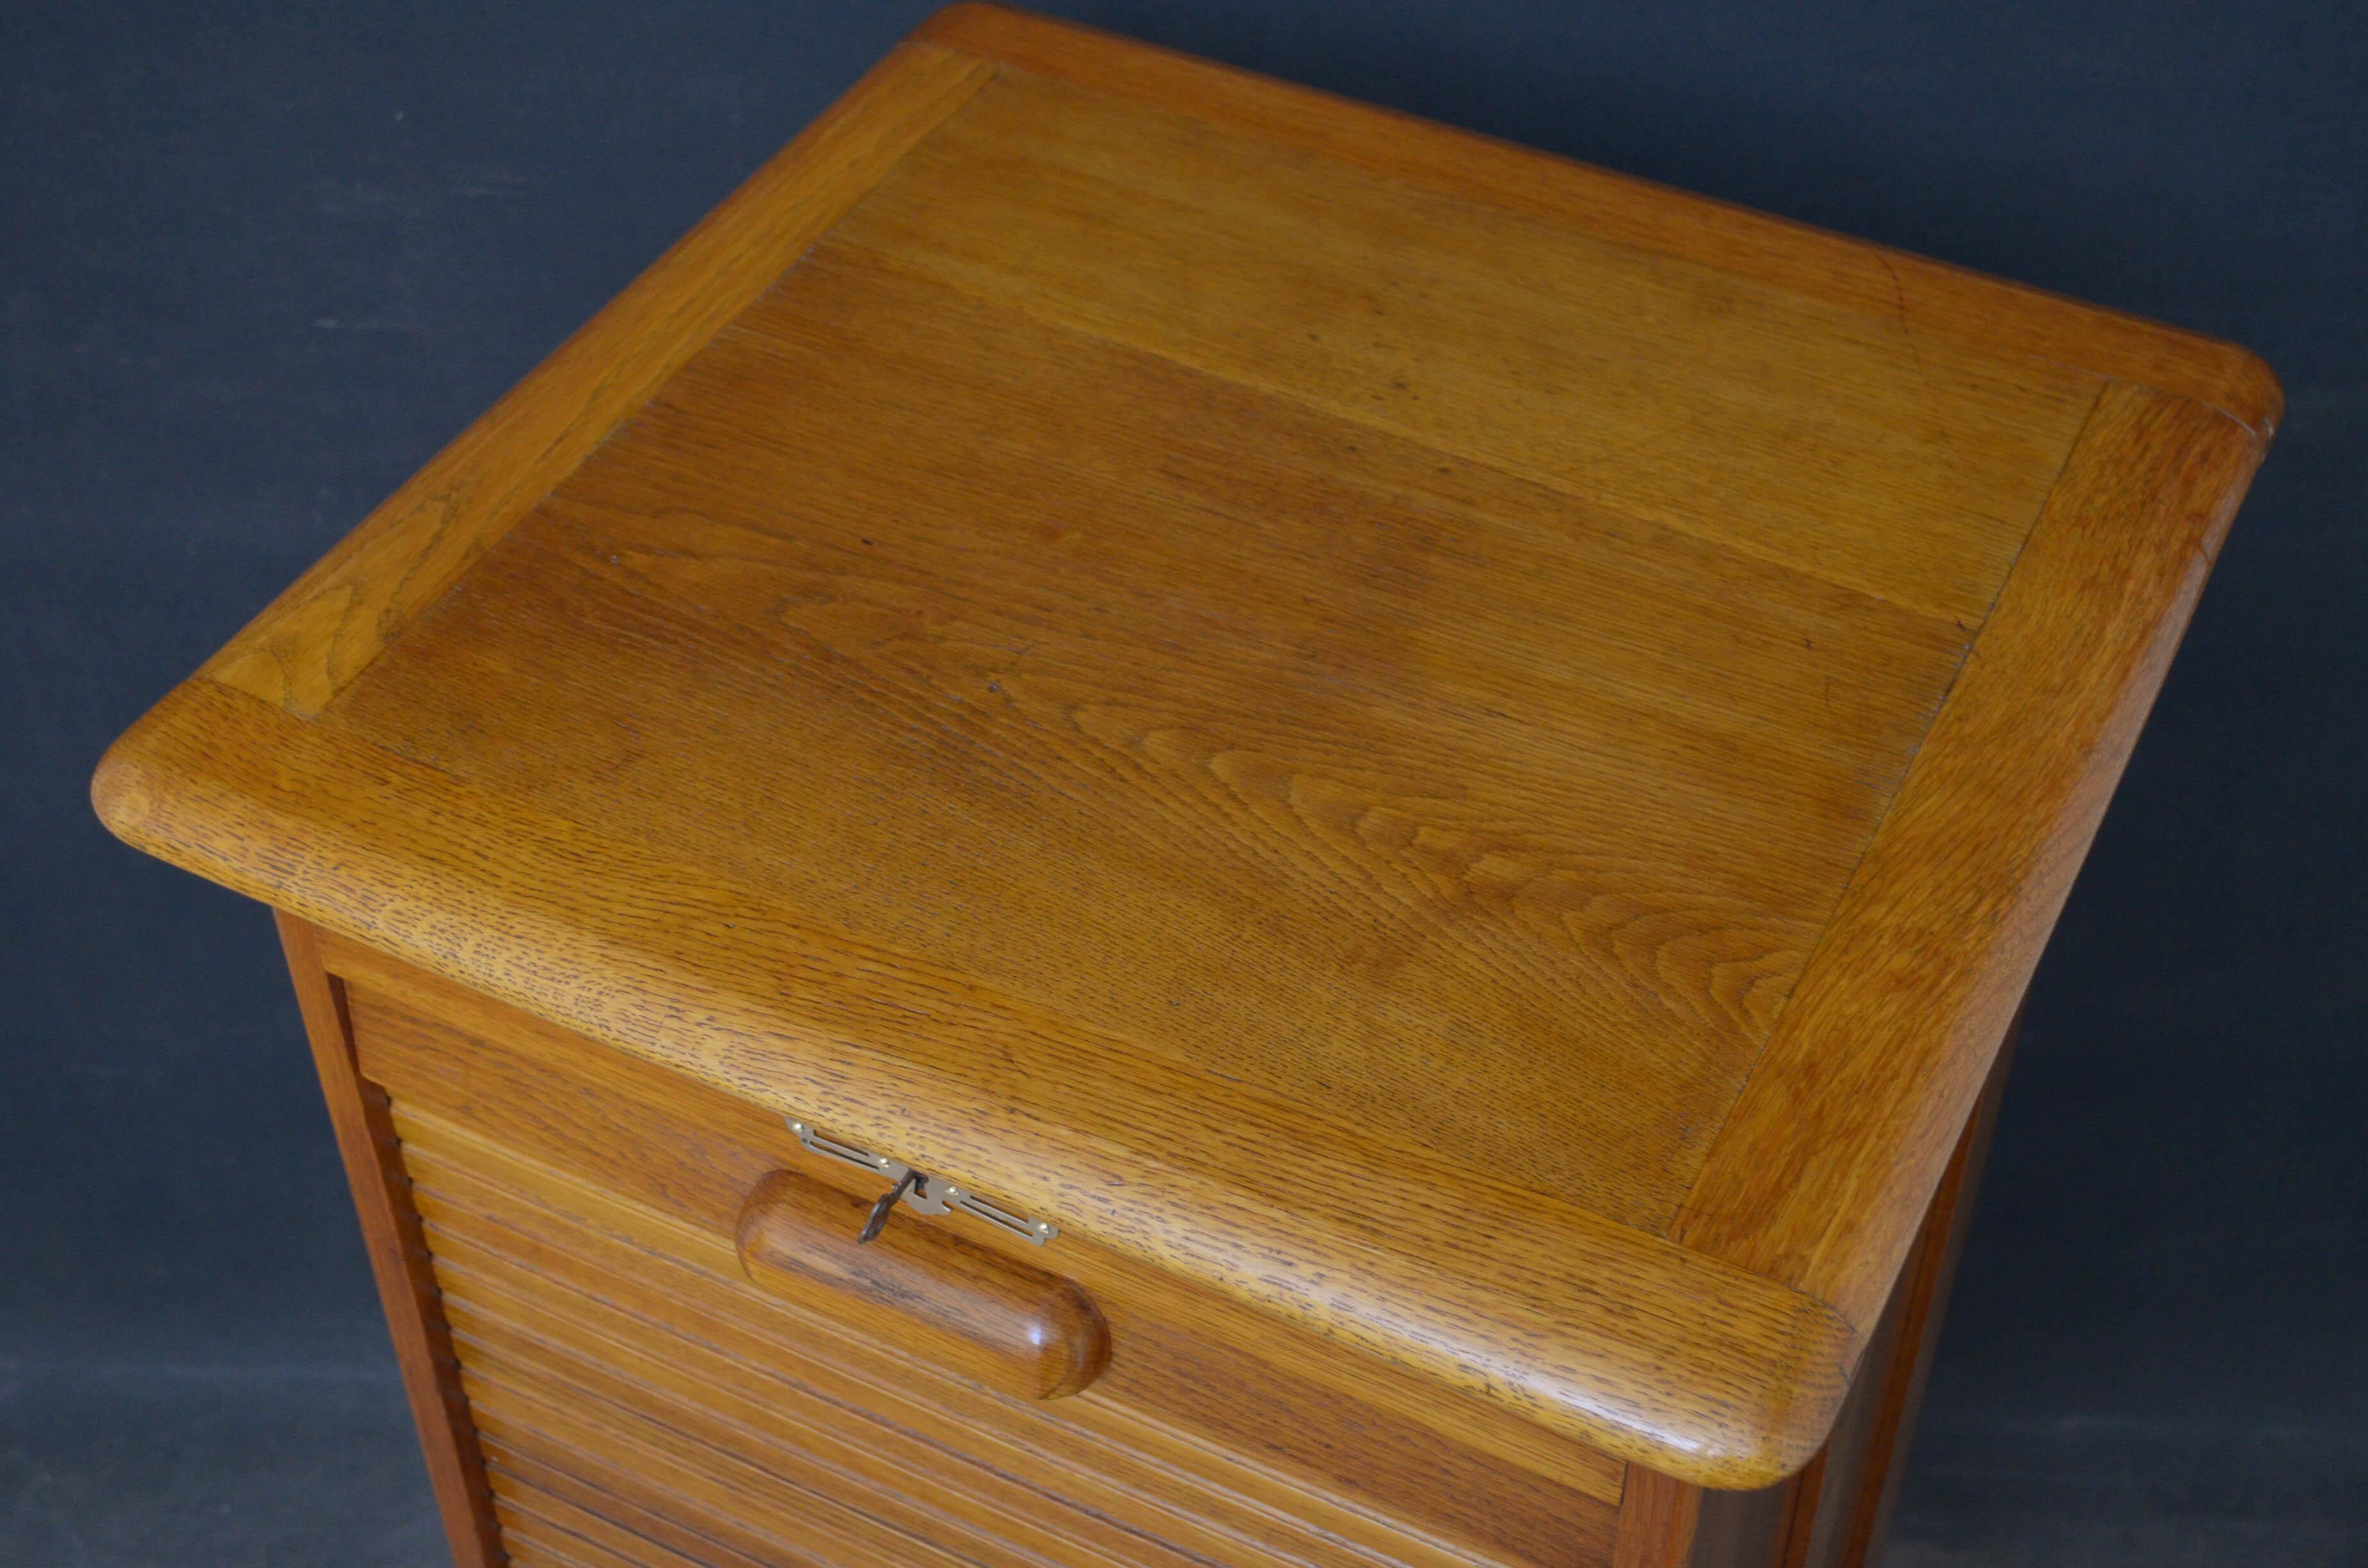 Sn4818, turn of the century oak, tambour fronted filing cabinet of soft color, having moulded top, panelled sides and tambour front enclosing 9 drawers, fitted with original working lock and key, standing on plinth base. This antique filing cabinet